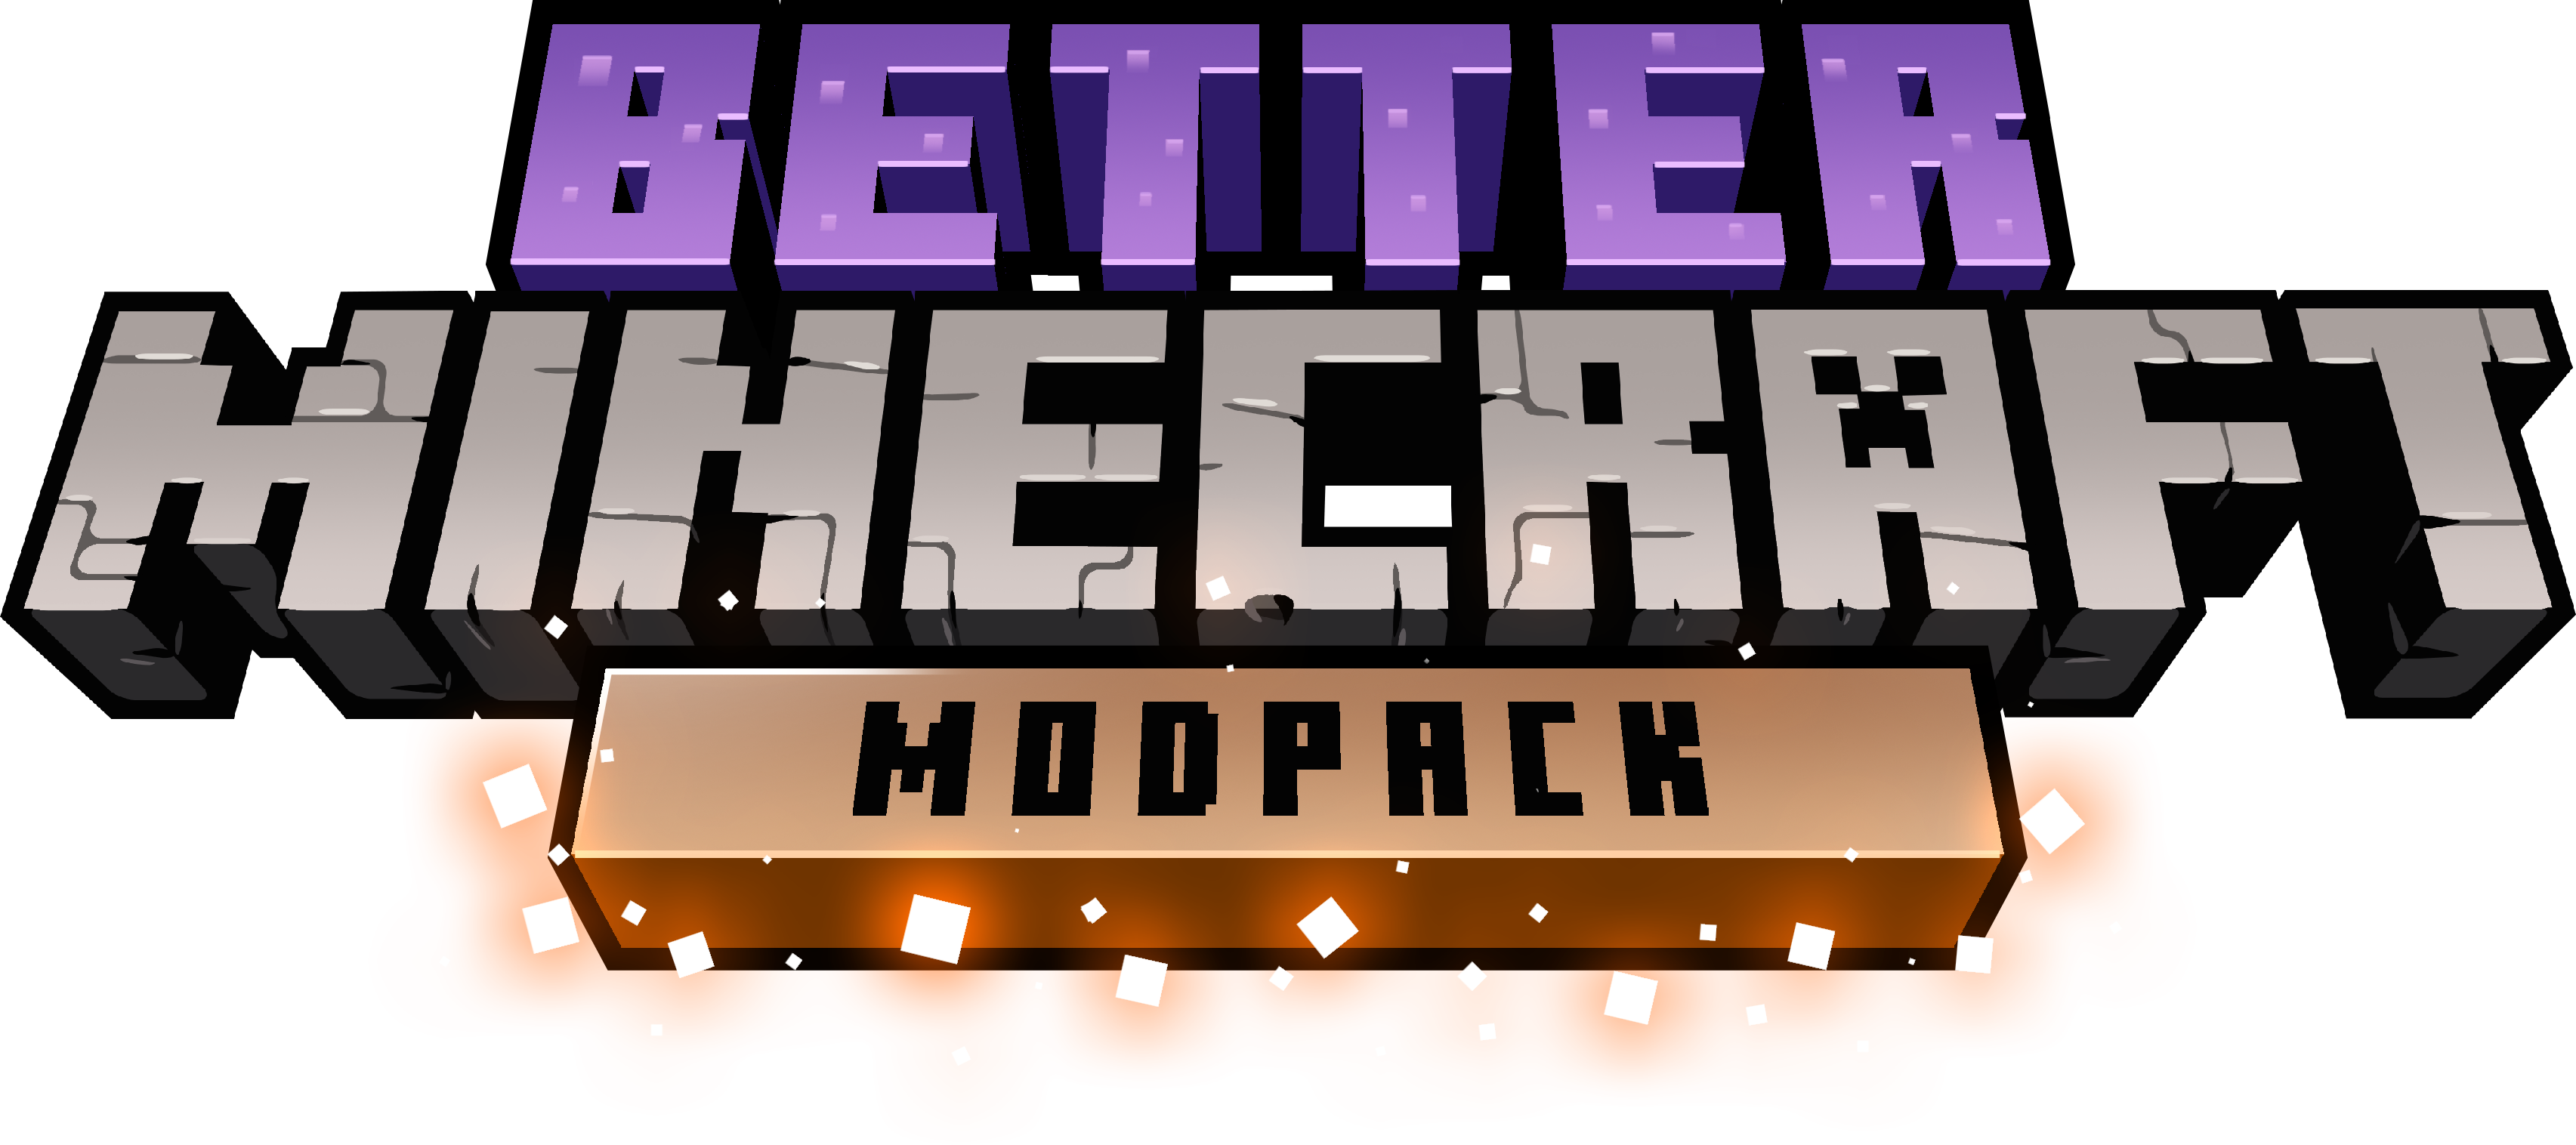 Minecraft logo download in SVG or PNG - LogosArchive